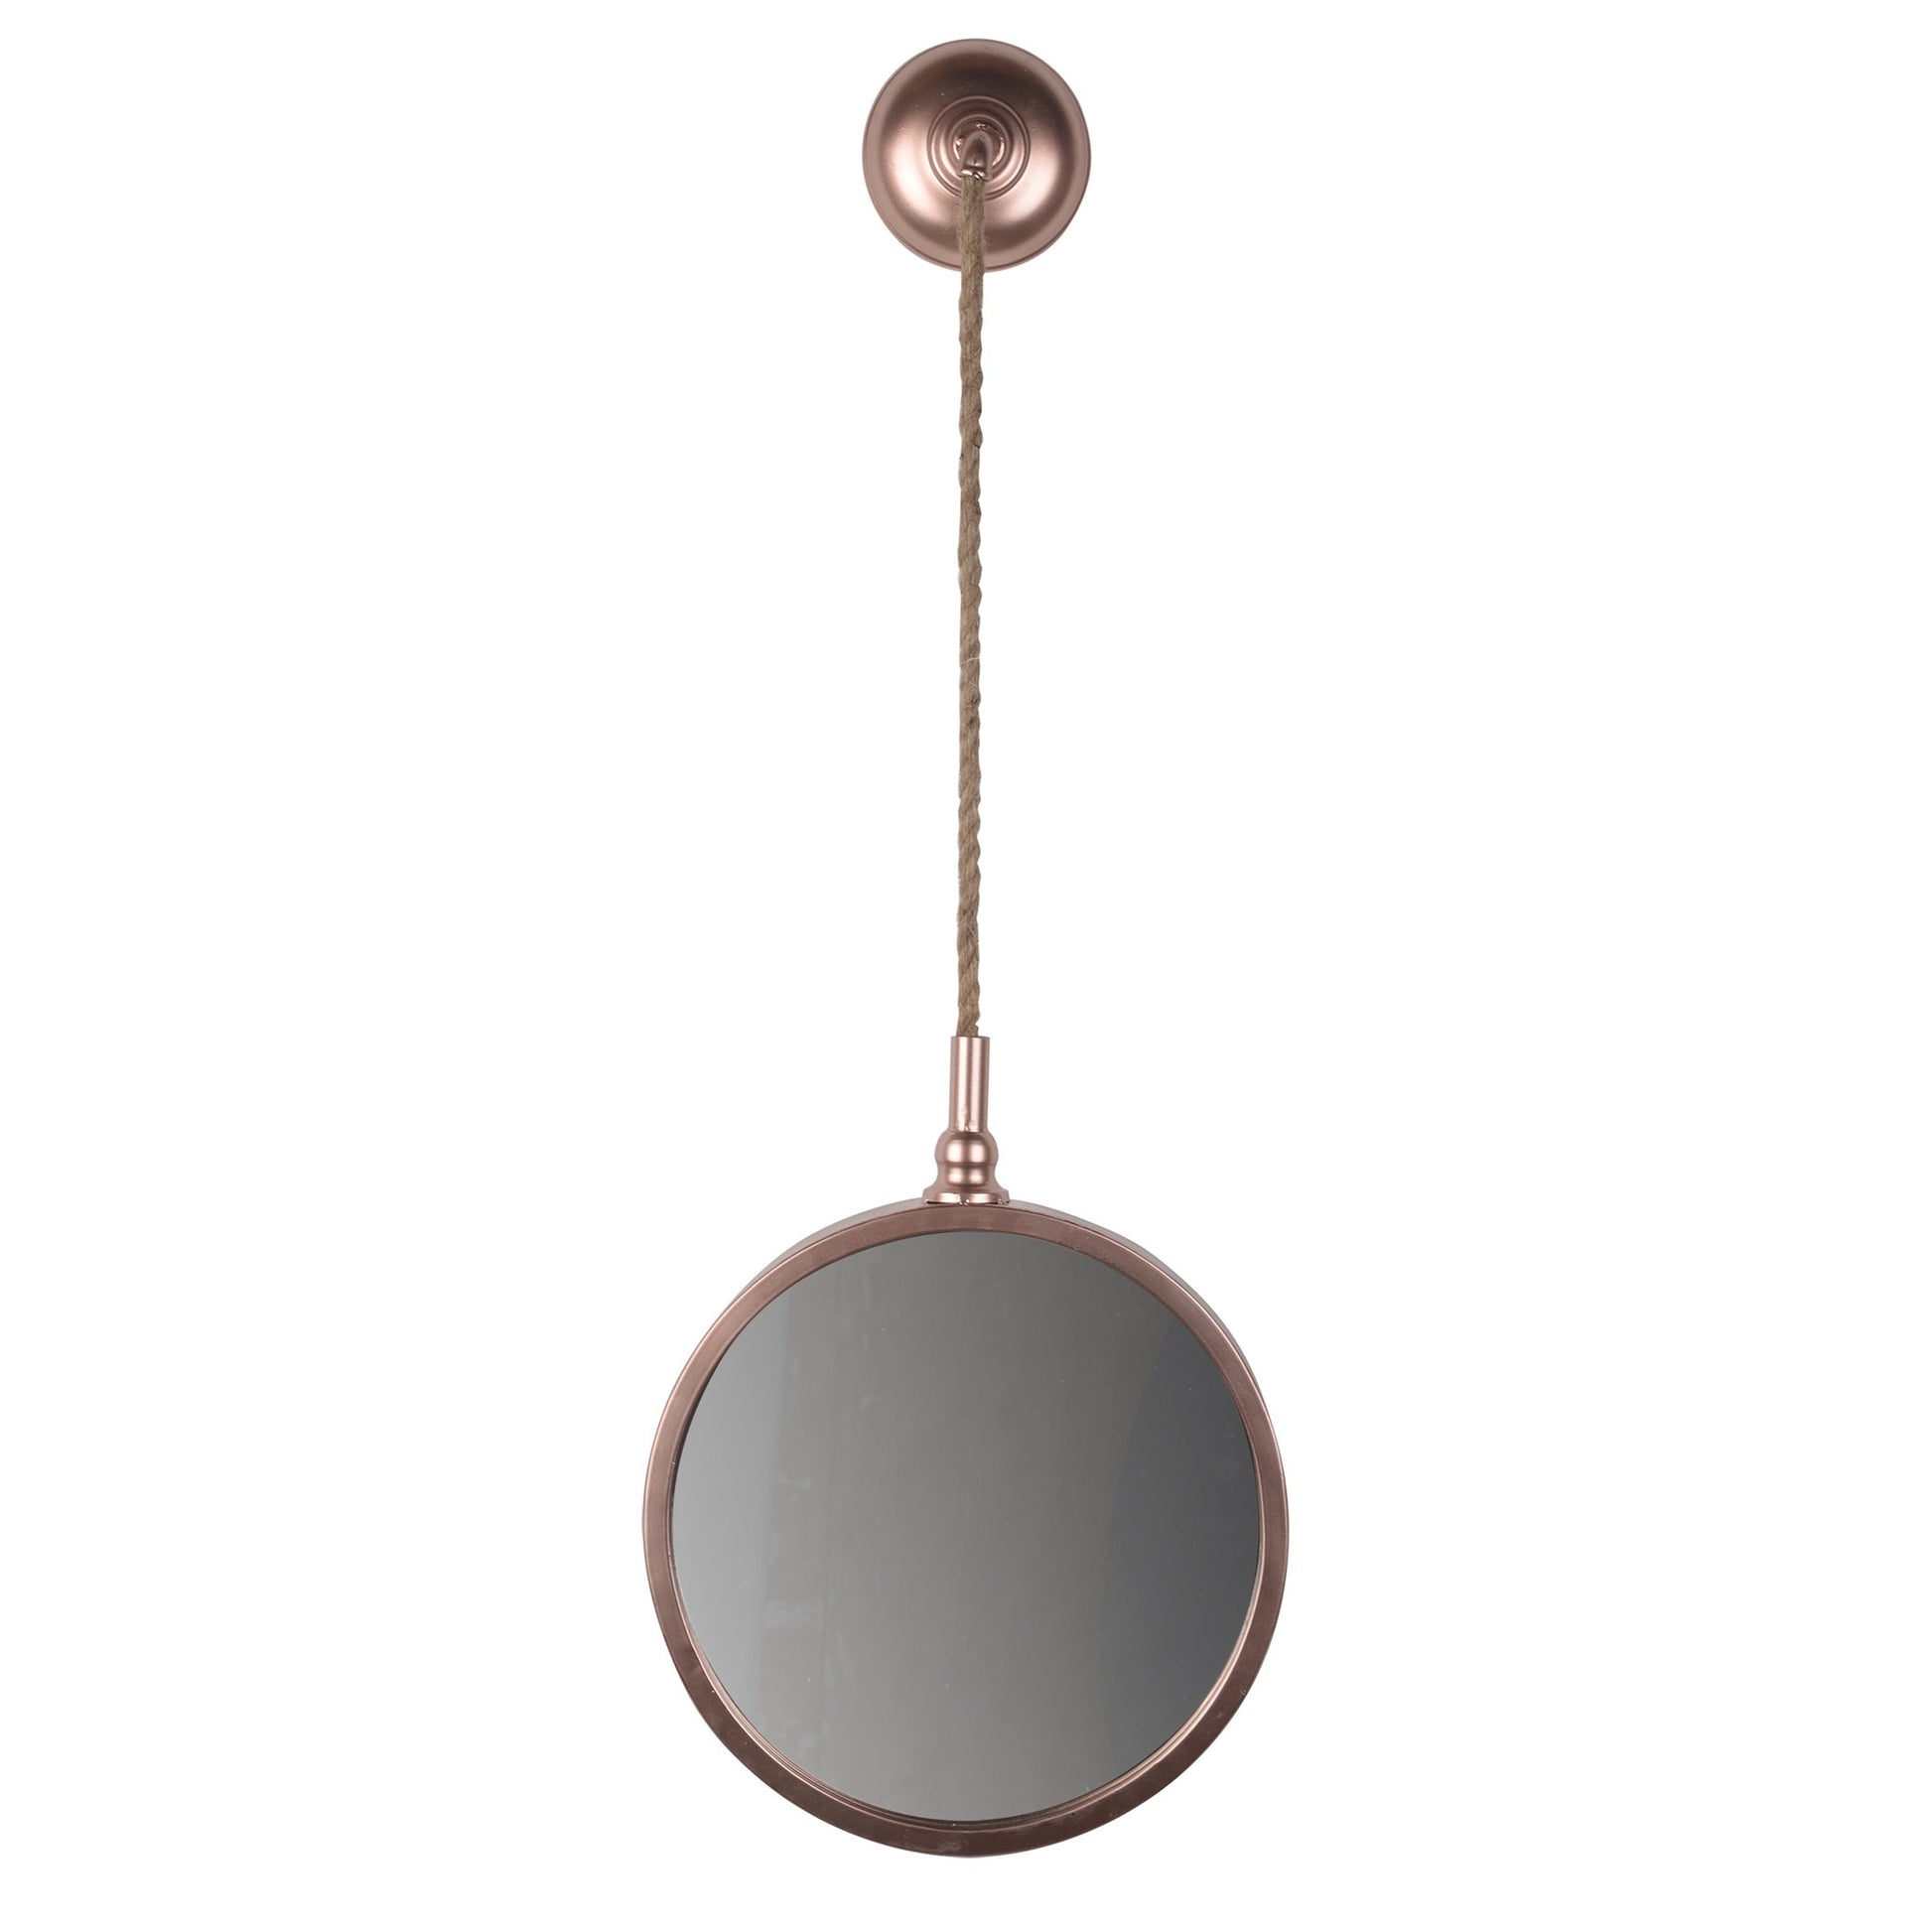 Benzara 34" Copper Small Round Metal Frame Wall Mirror With Attached Rope Hanging